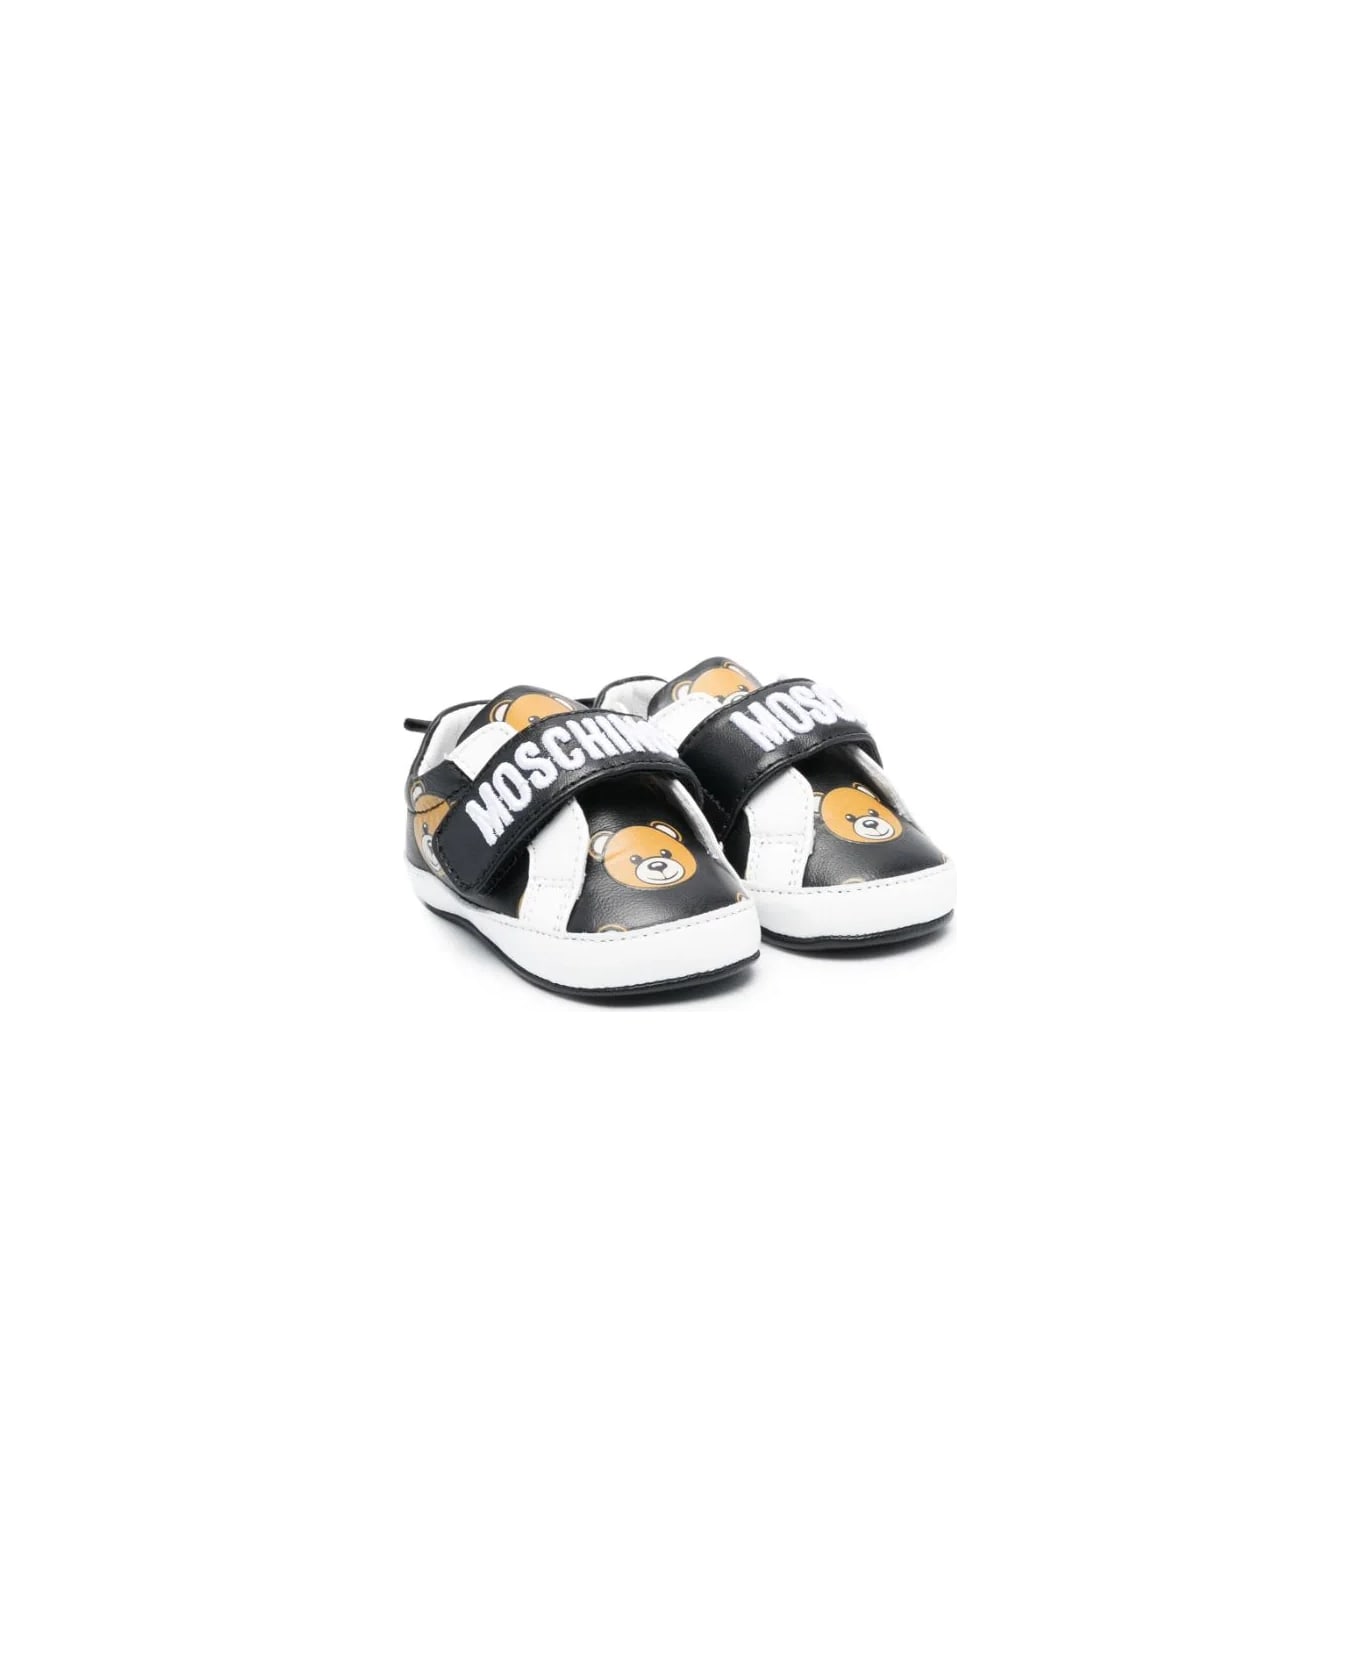 Moschino Teddy Bear Sneakers With Print - Black